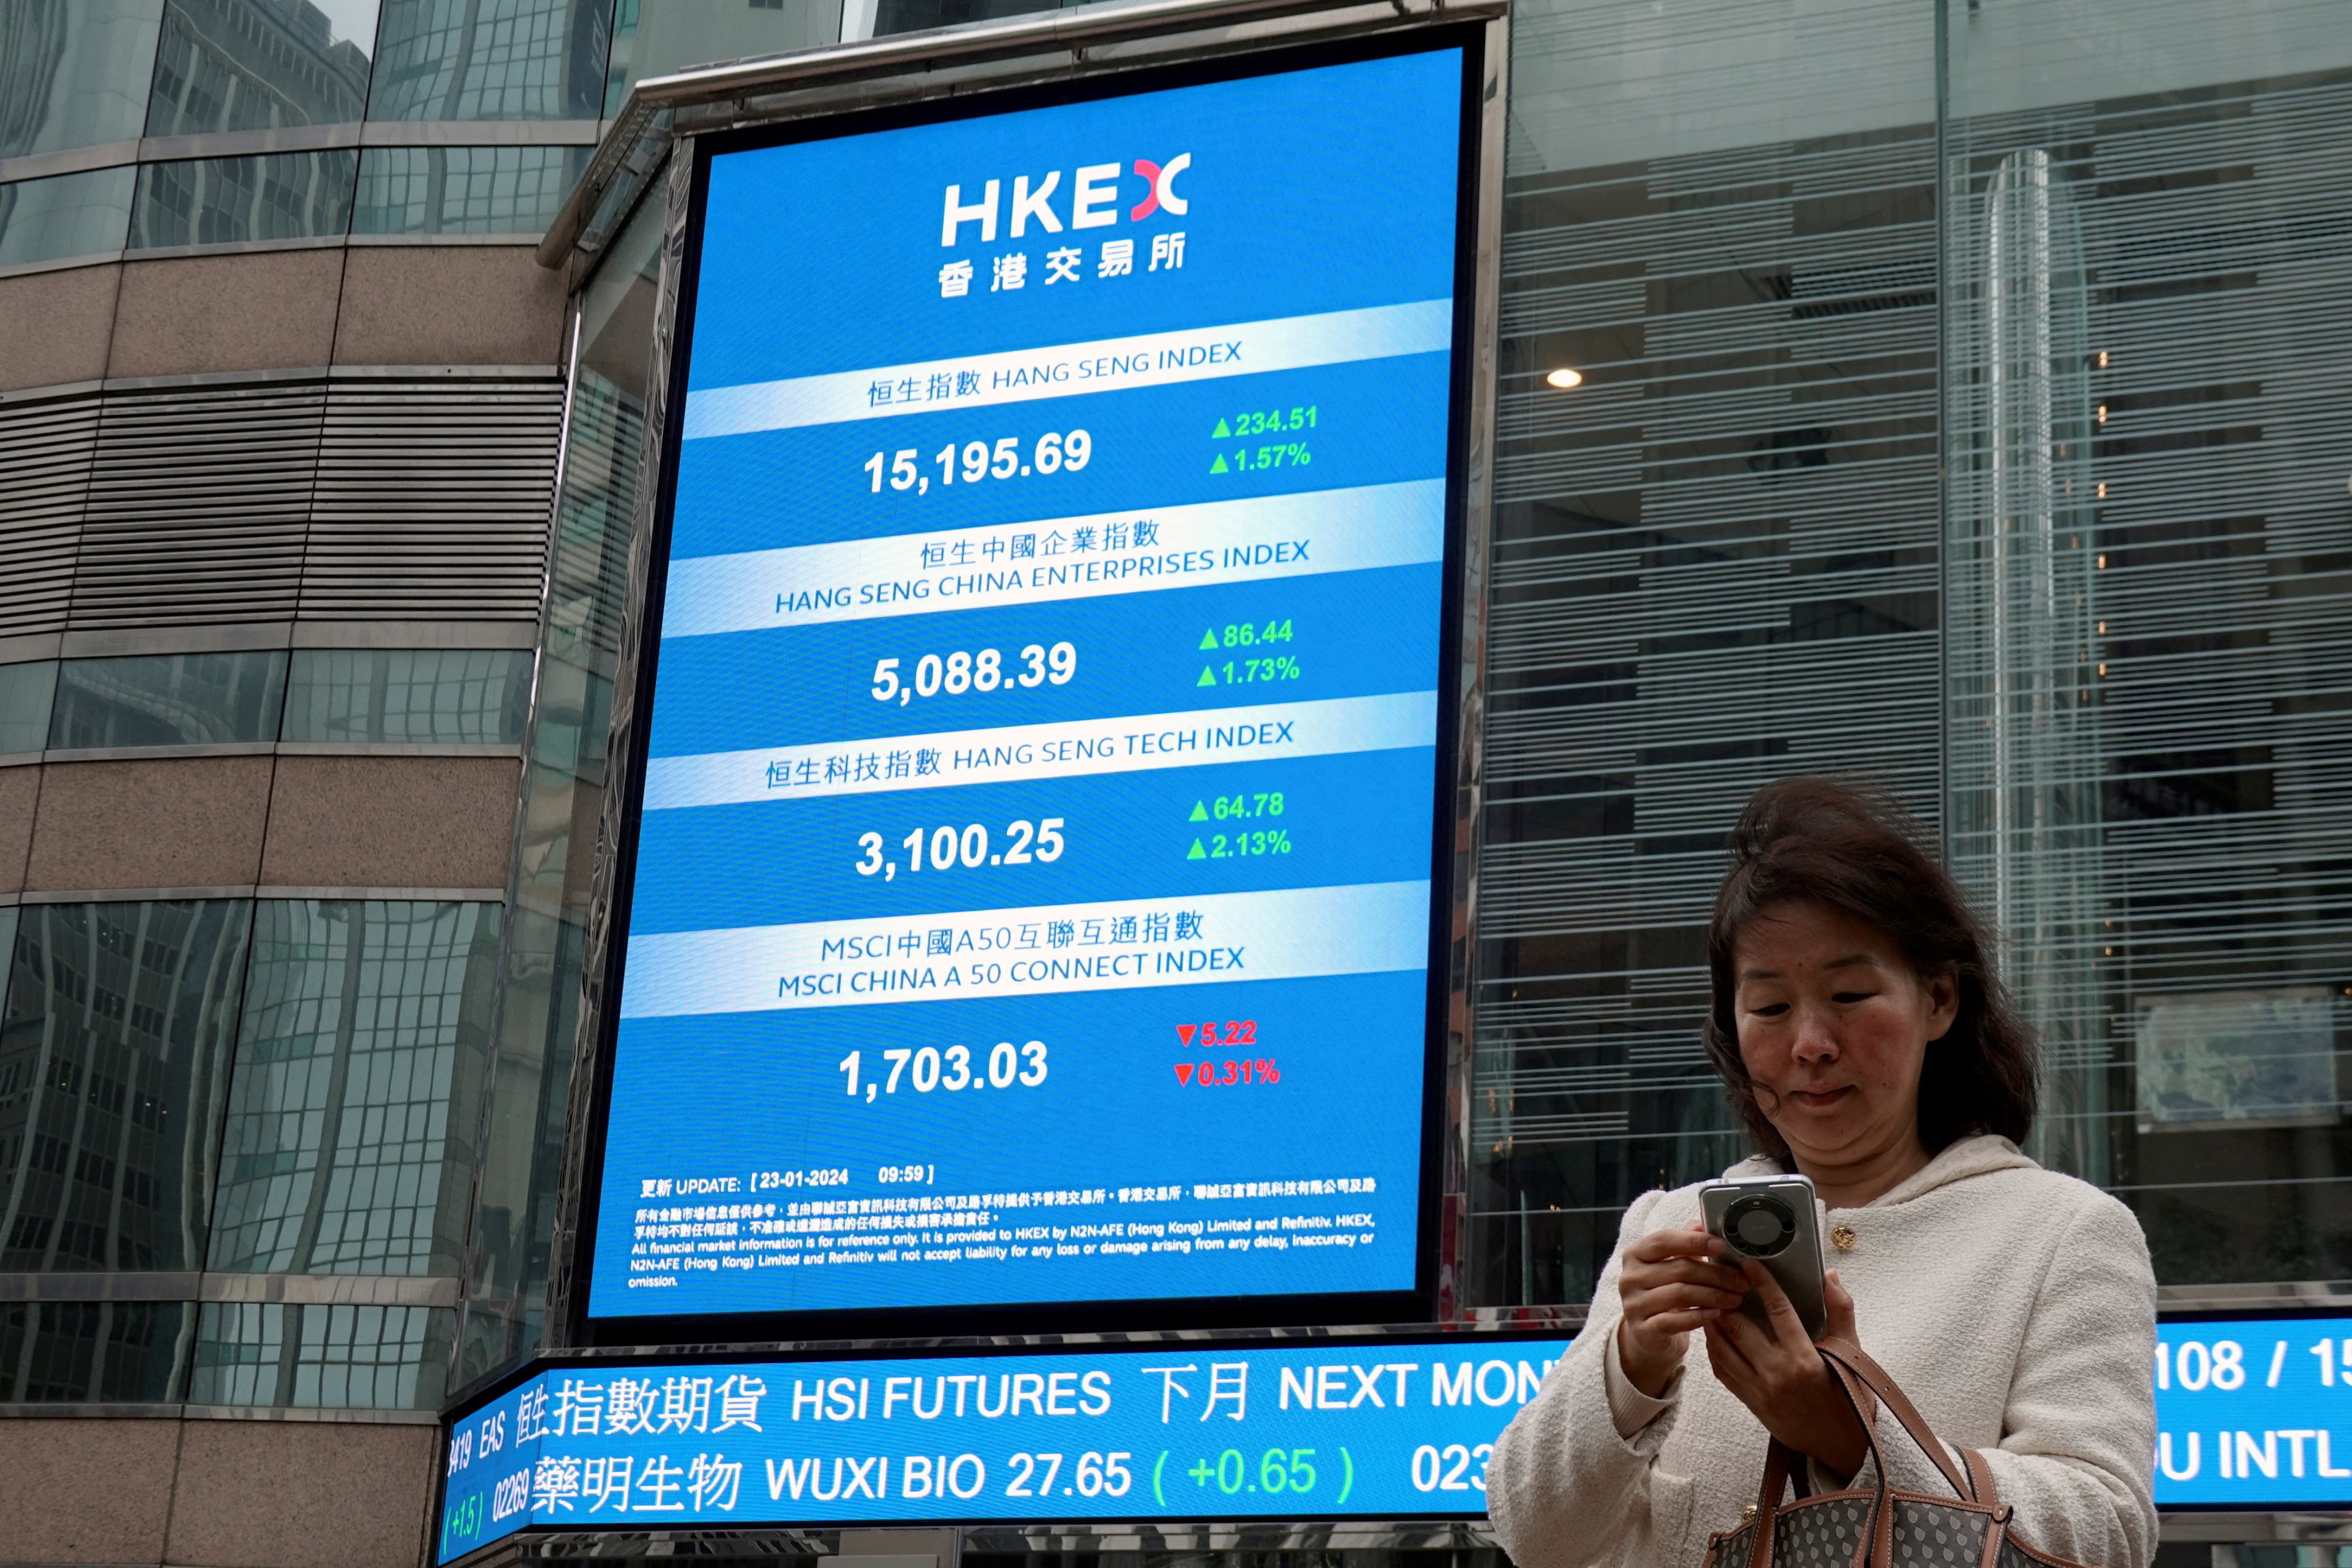 The bourse operator, Hong Kong Exchanges and Clearing, has focused strongly on attracting international listings in recent years. Photo: Reuters